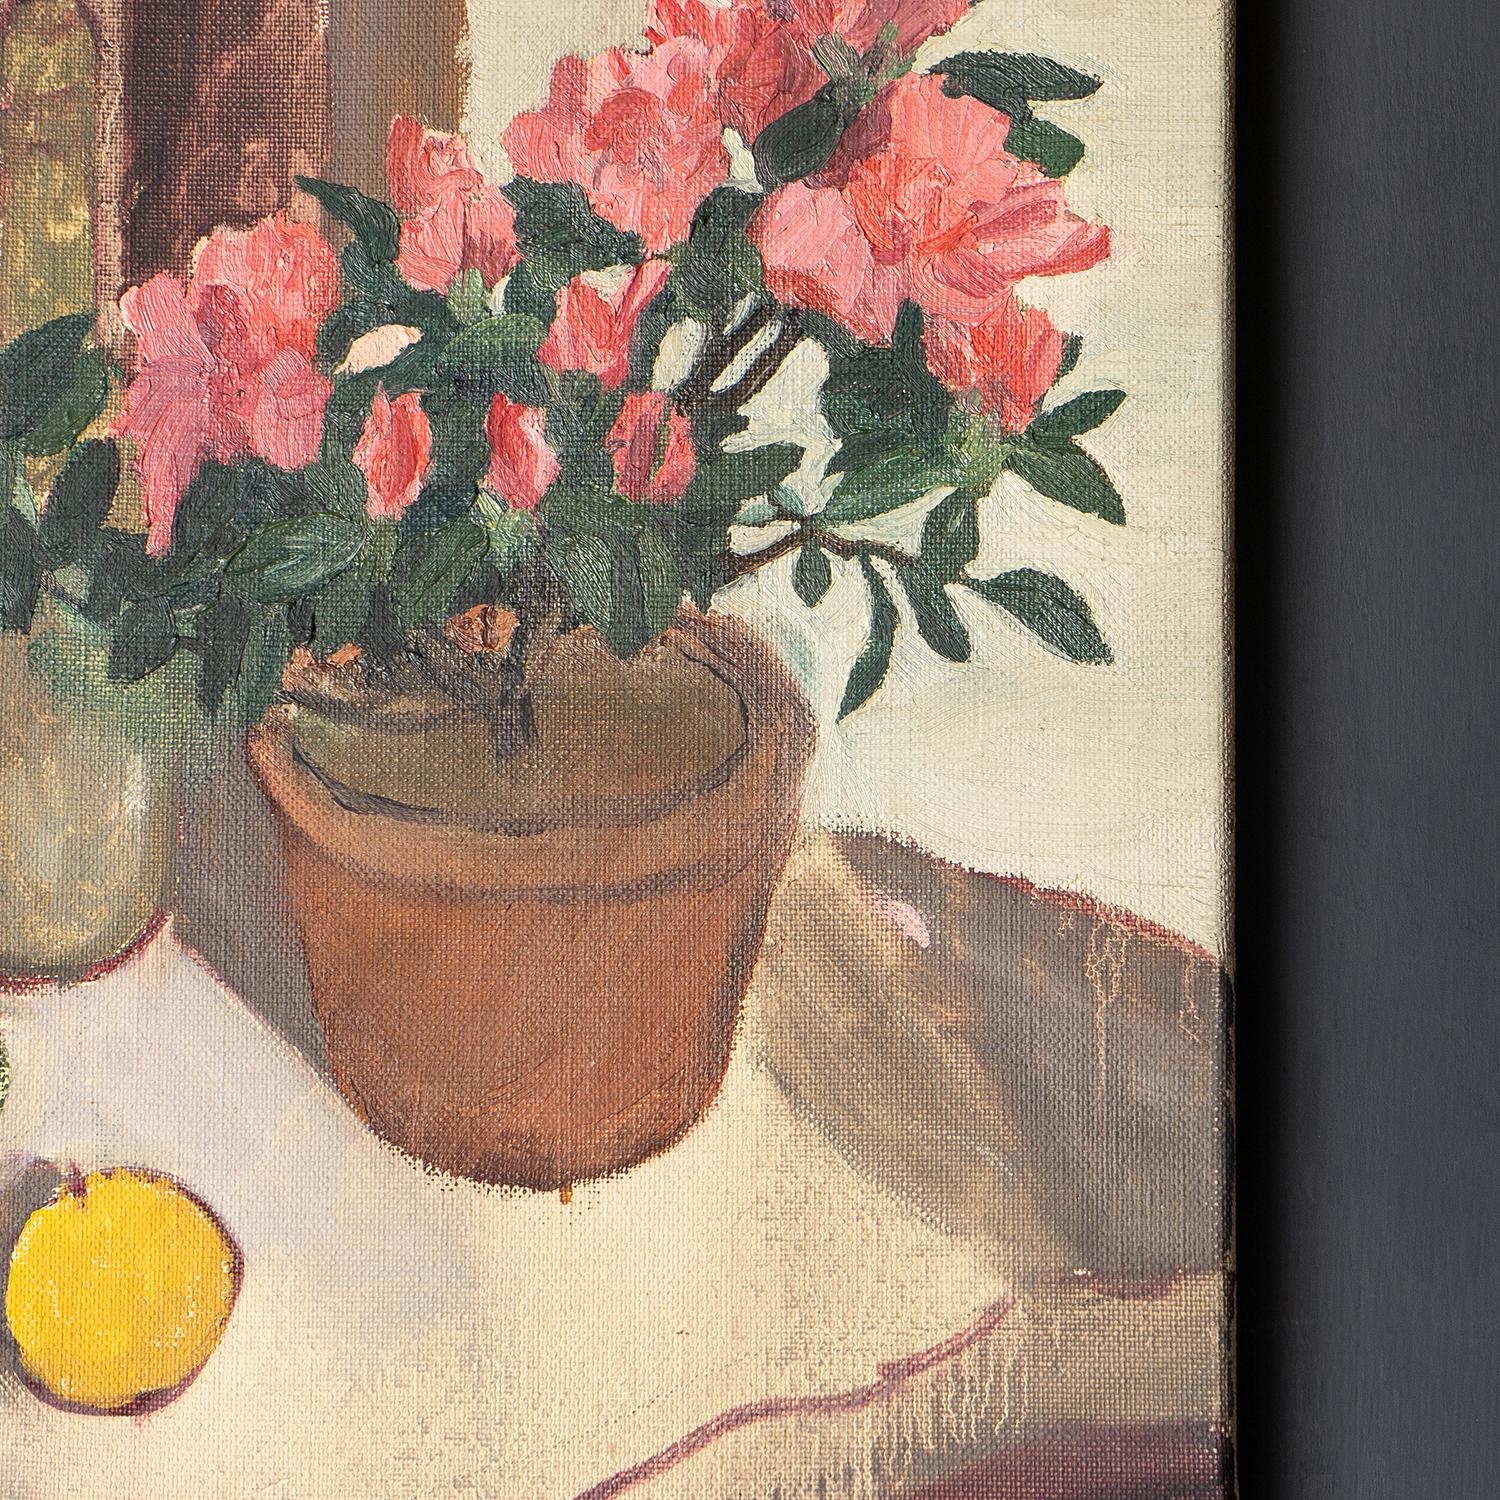 Small Vintage Still Life Depicting Pink Flowers and Citrus Fruit, Original Oil 1